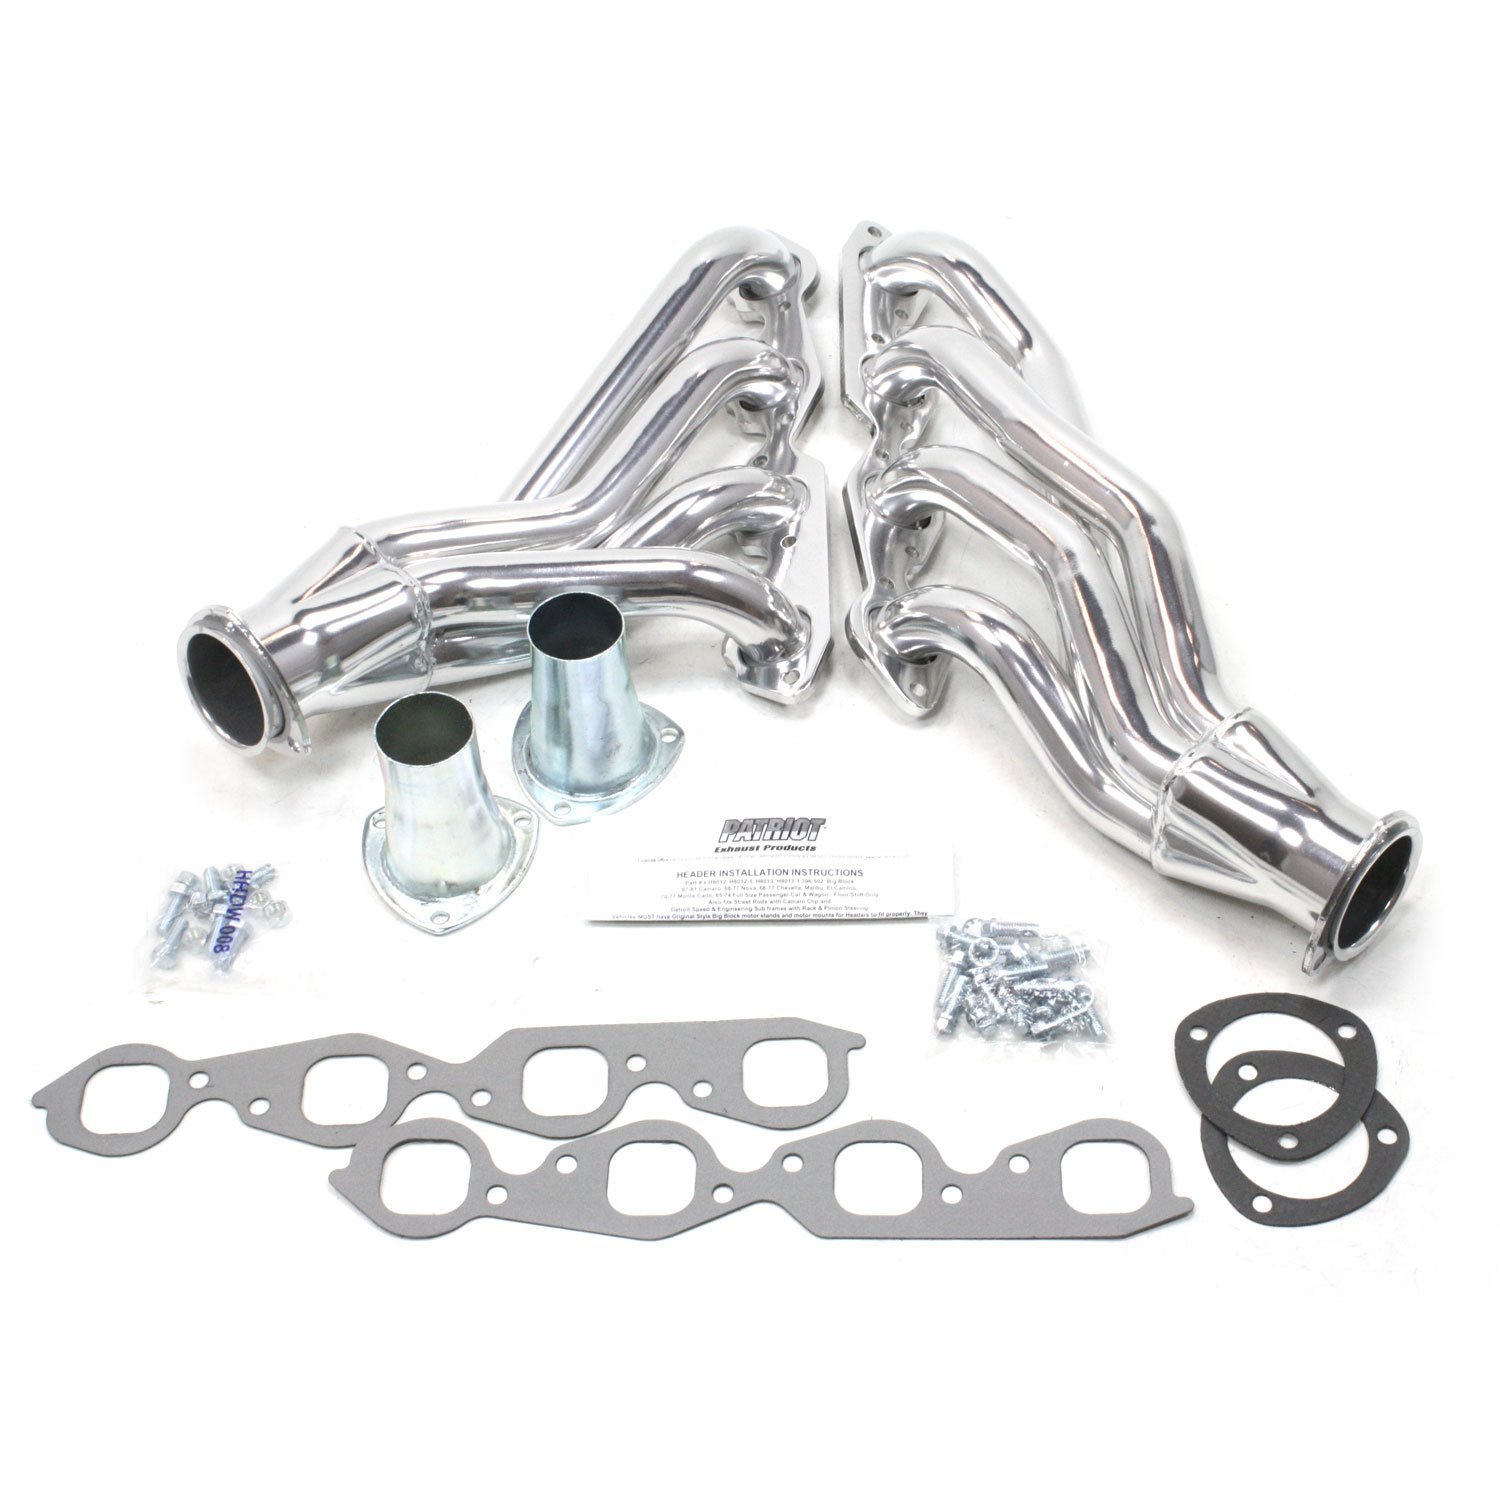 GM Specific Fit Headers 1965-74 Full Size Passenger